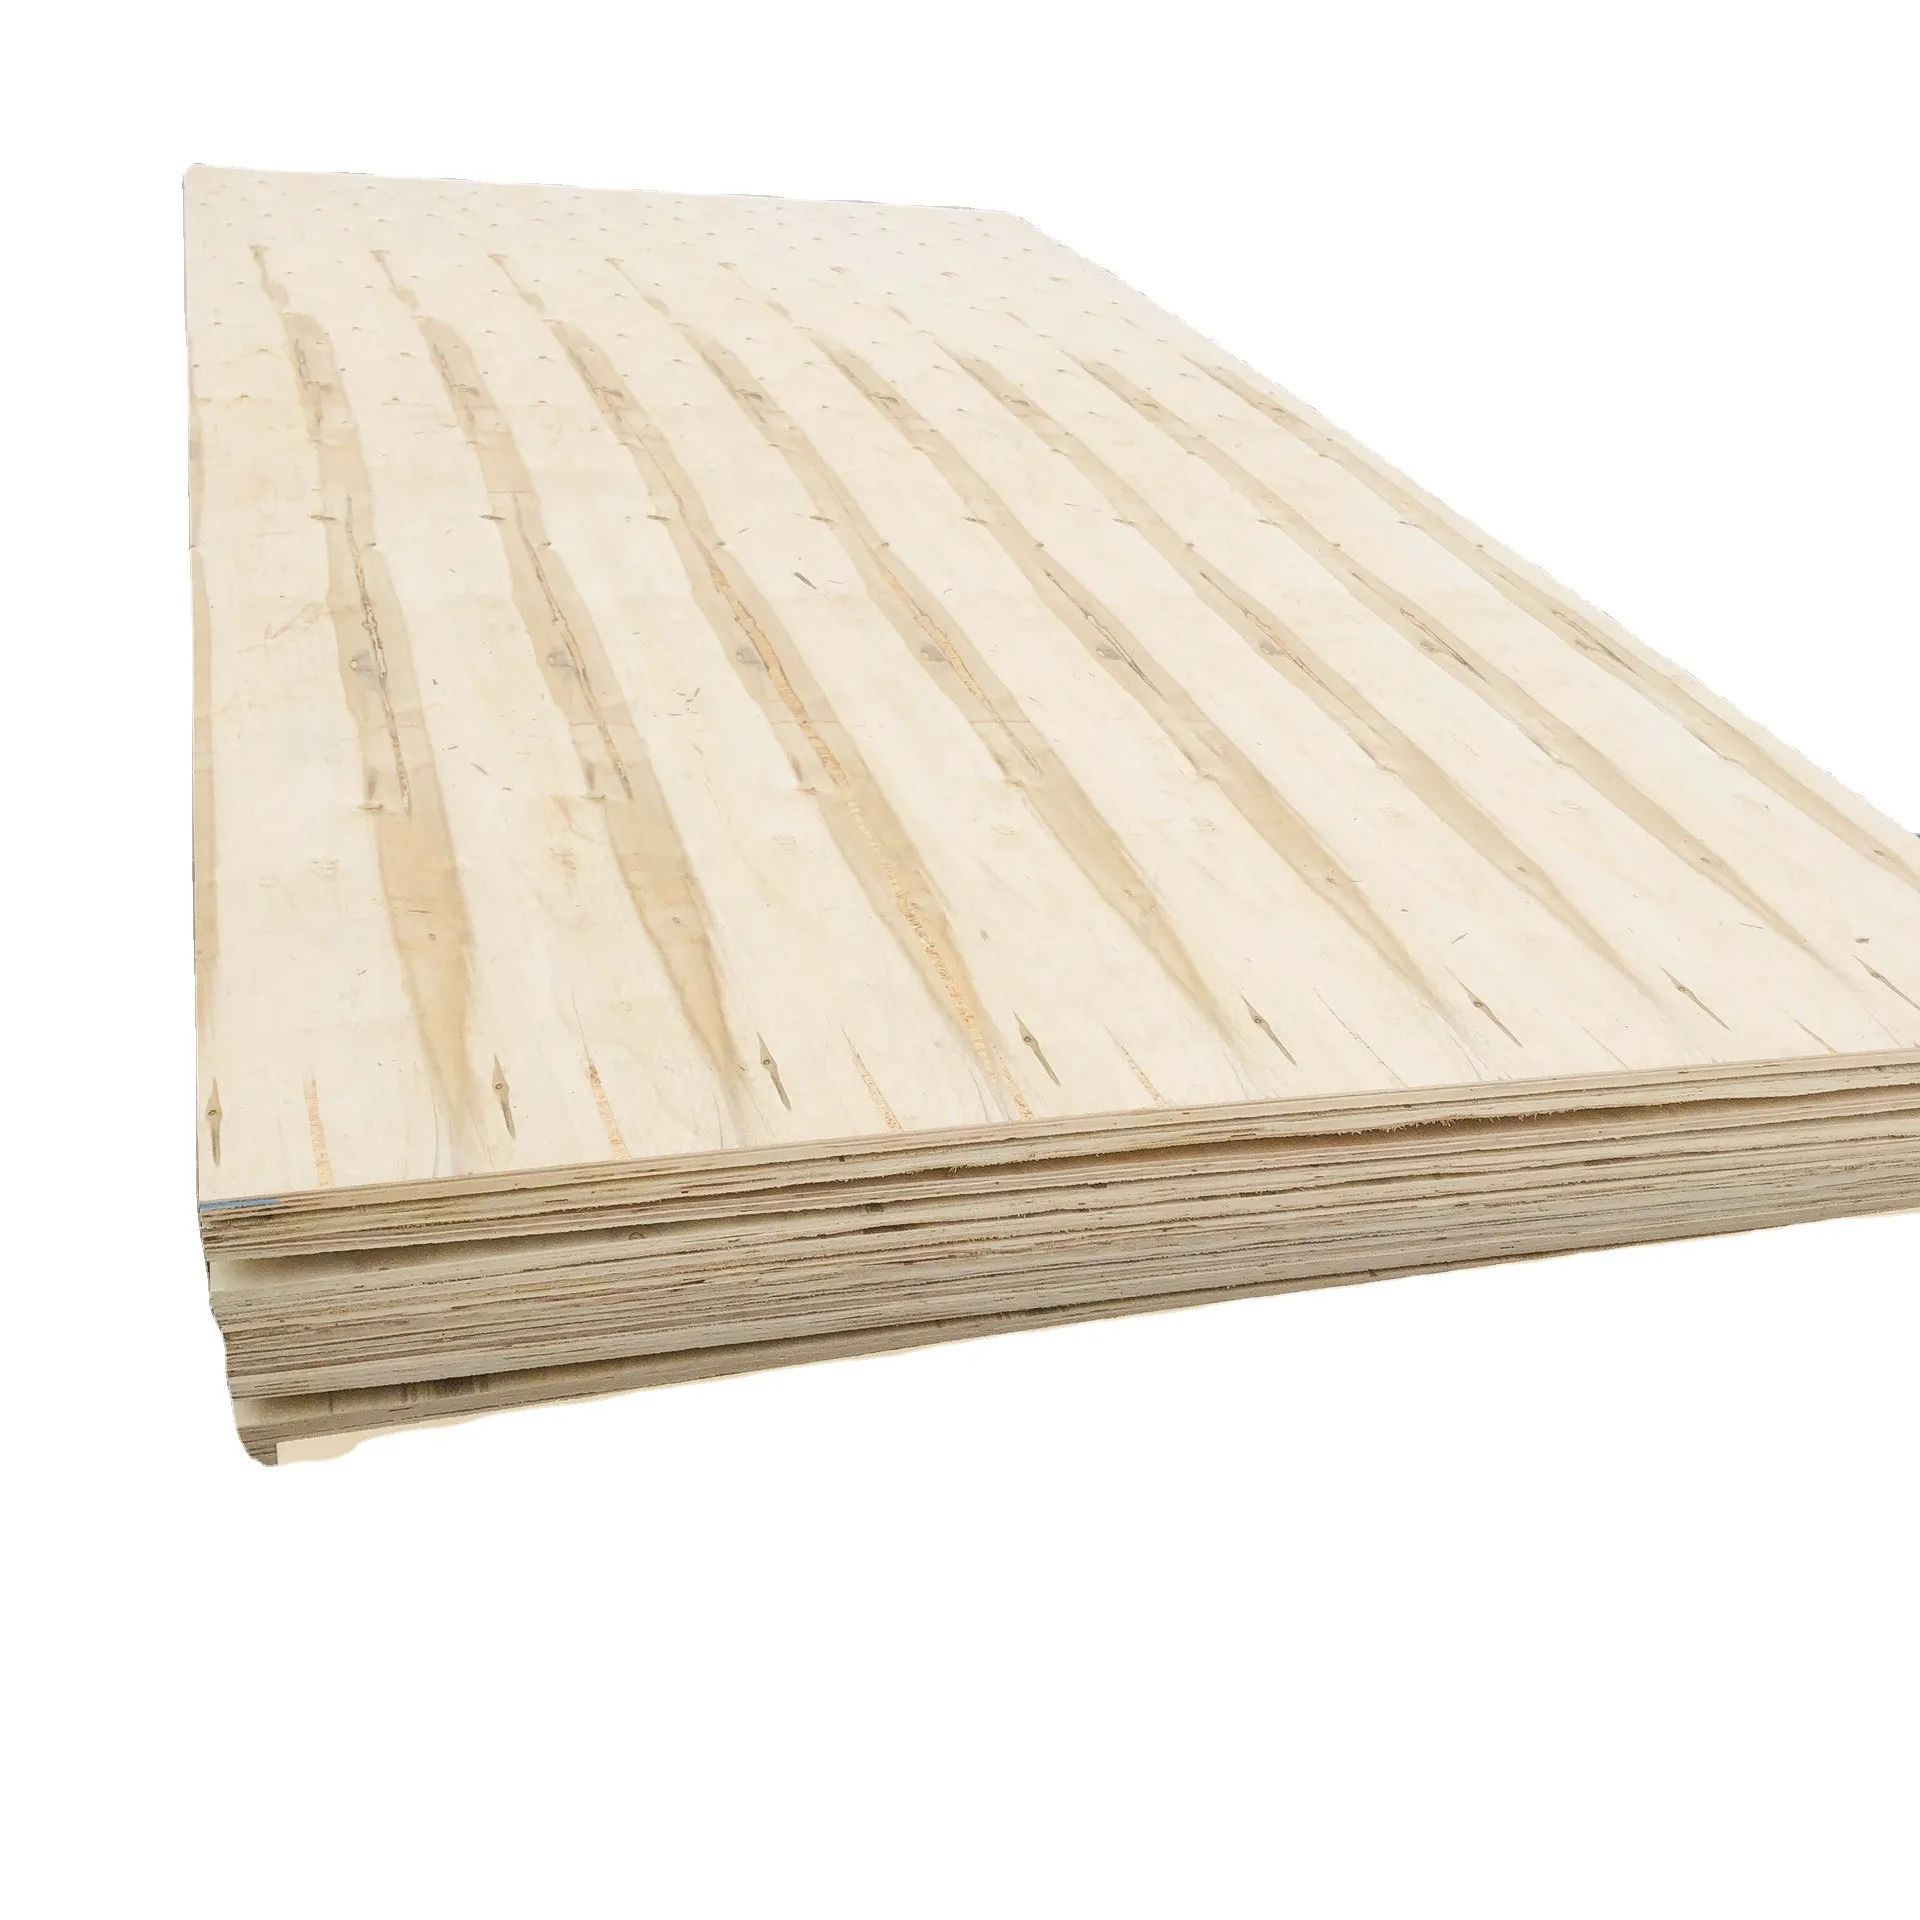 High Quality Wholesales Plywood Sheet Plywood Furniture Glue Ply Wood Made in Vietnam MR Waterproof Industrial Surface